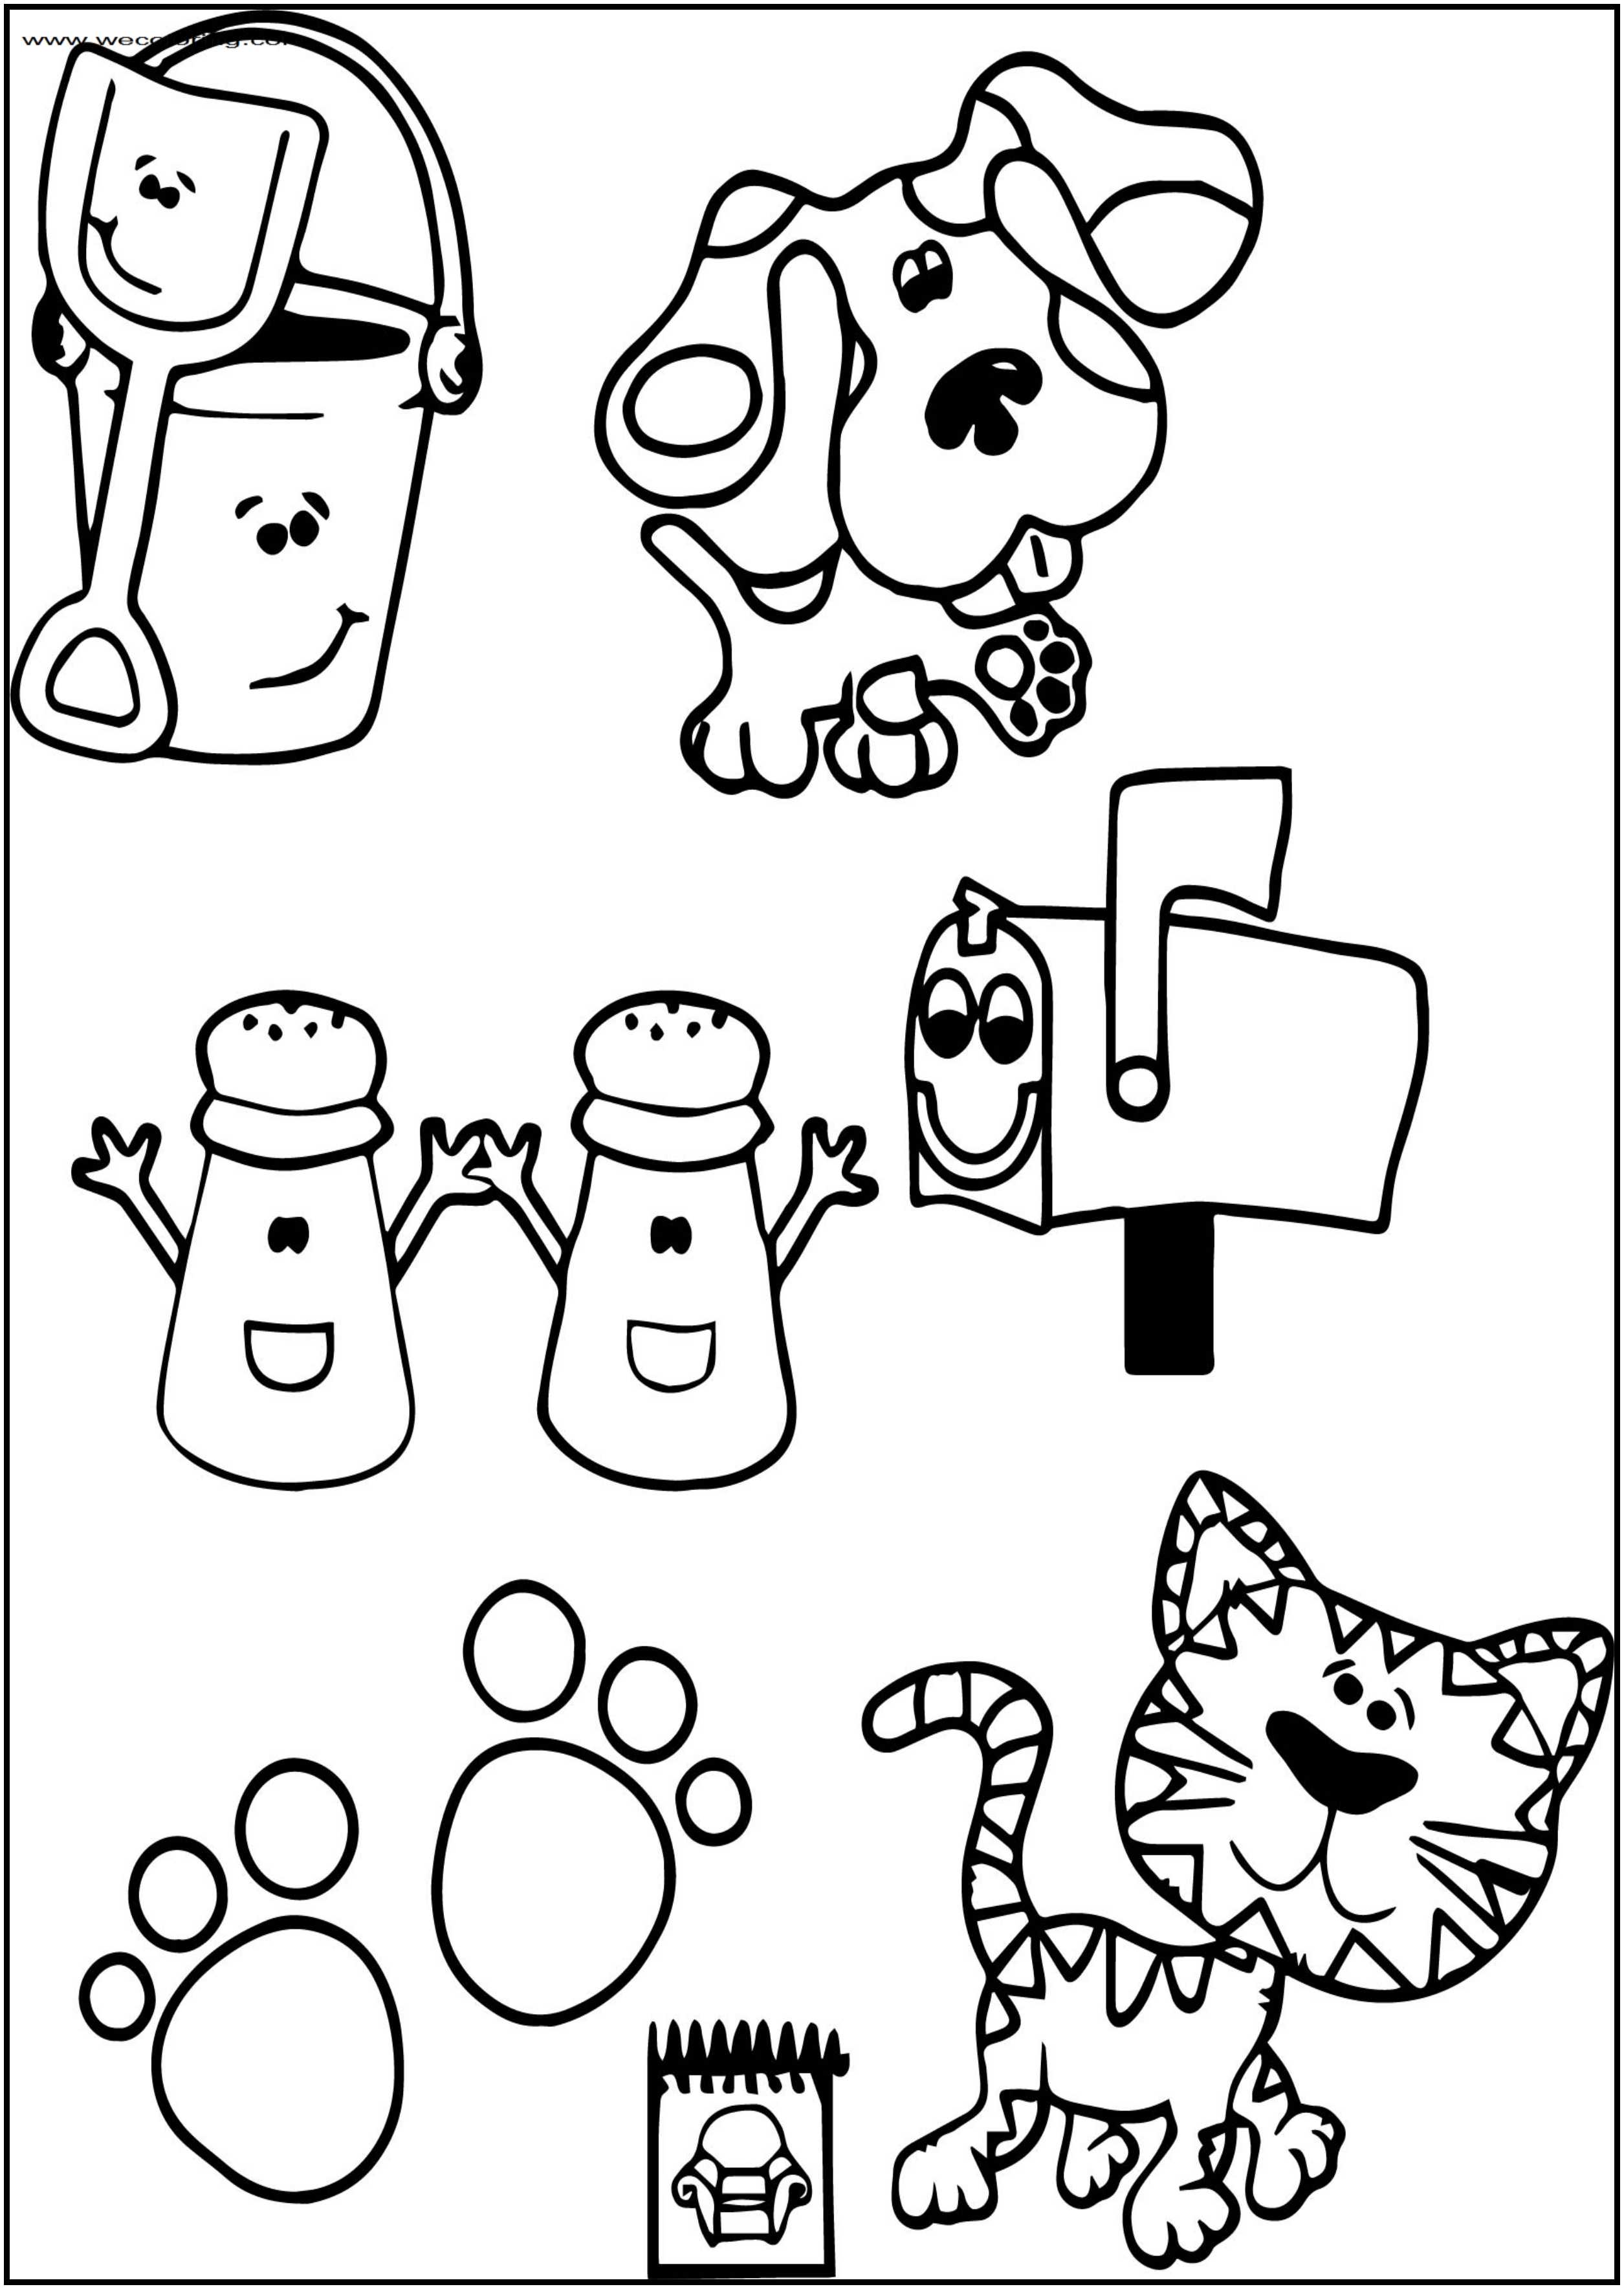 Printable Blues Clues Coloring Pages - Blues Clues Coloring Pages